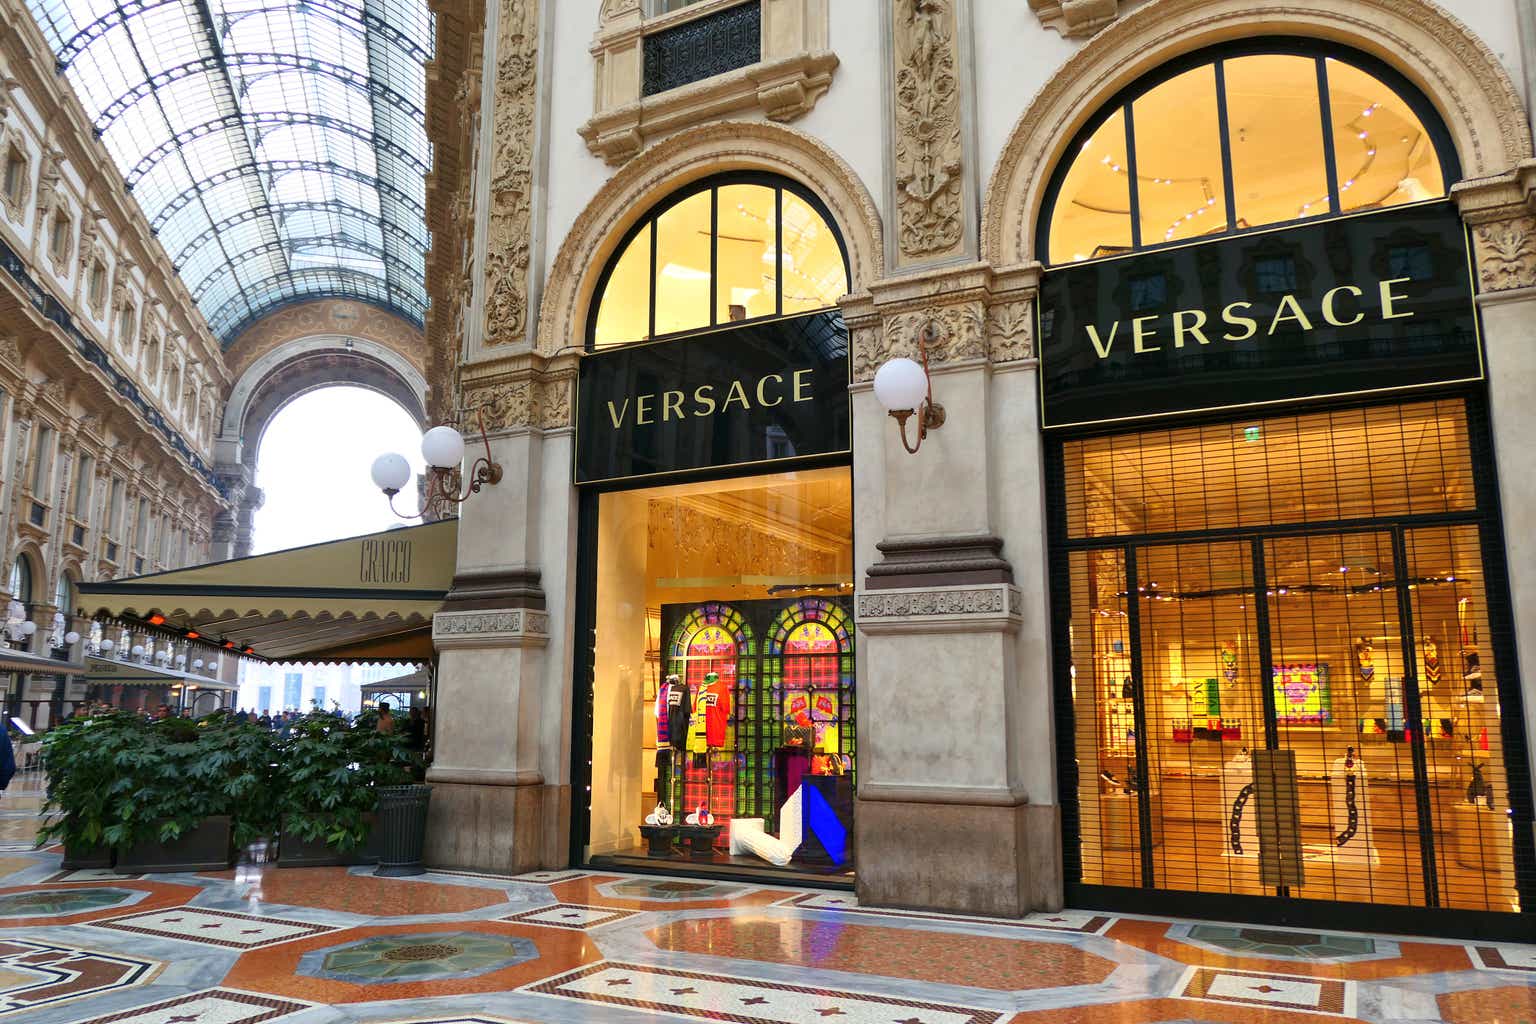 The World's Top 50 Luxury Brands Lost $7.6B in Value This Year